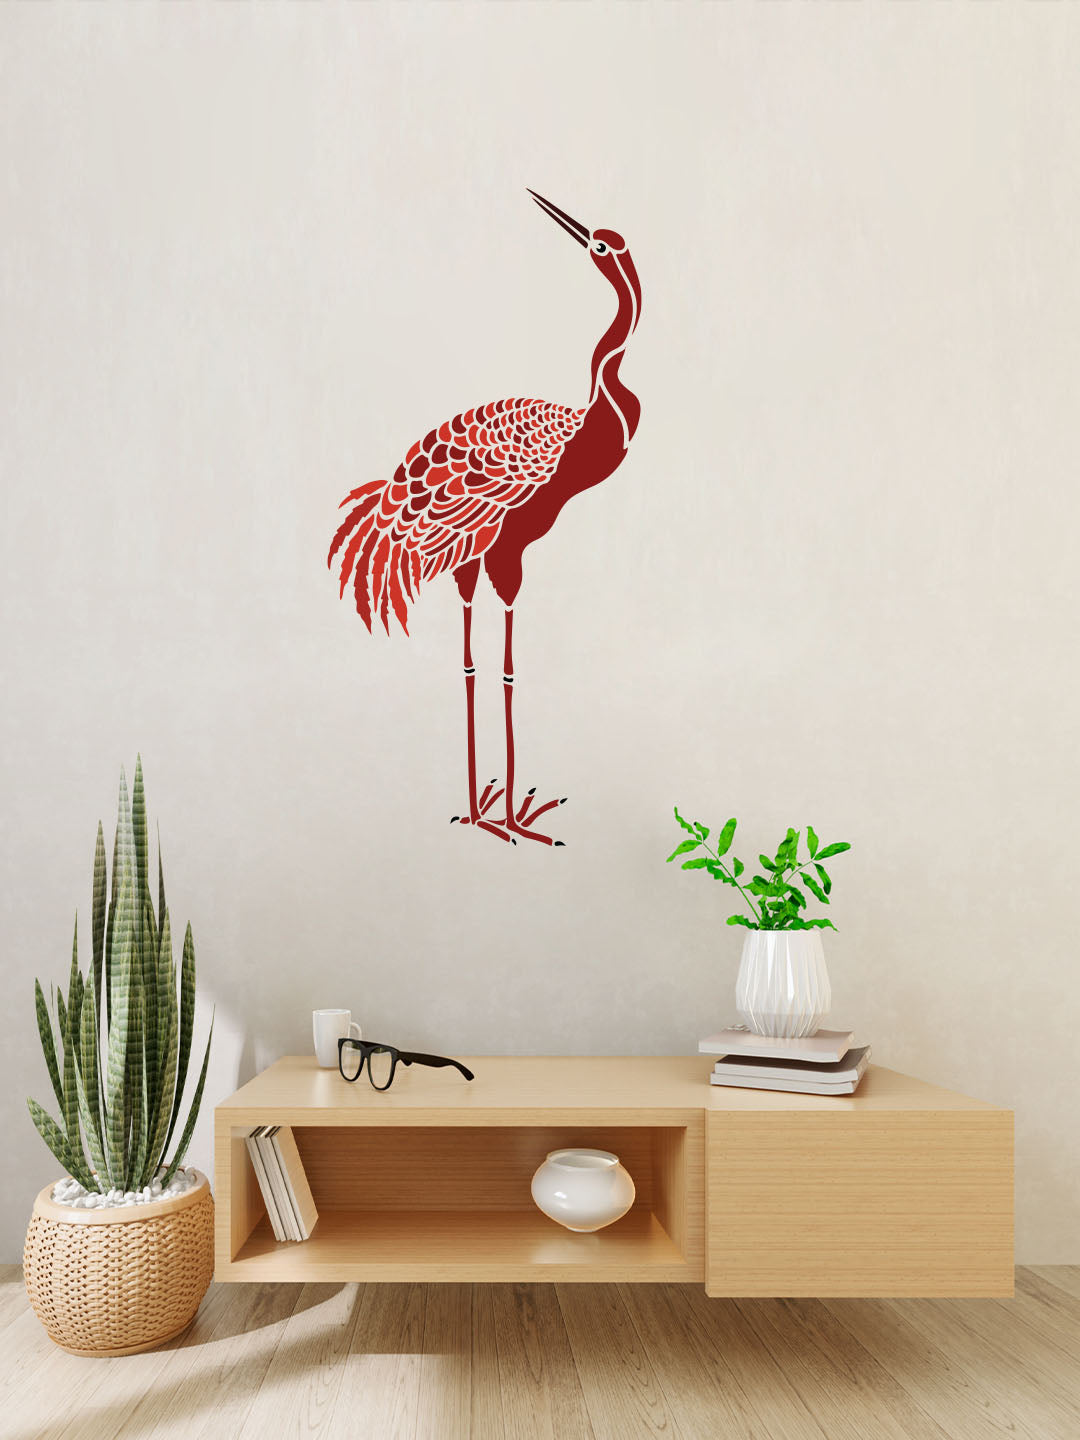 Beautiful Crane Design Stencil for Wall Painting (KDMD1445)